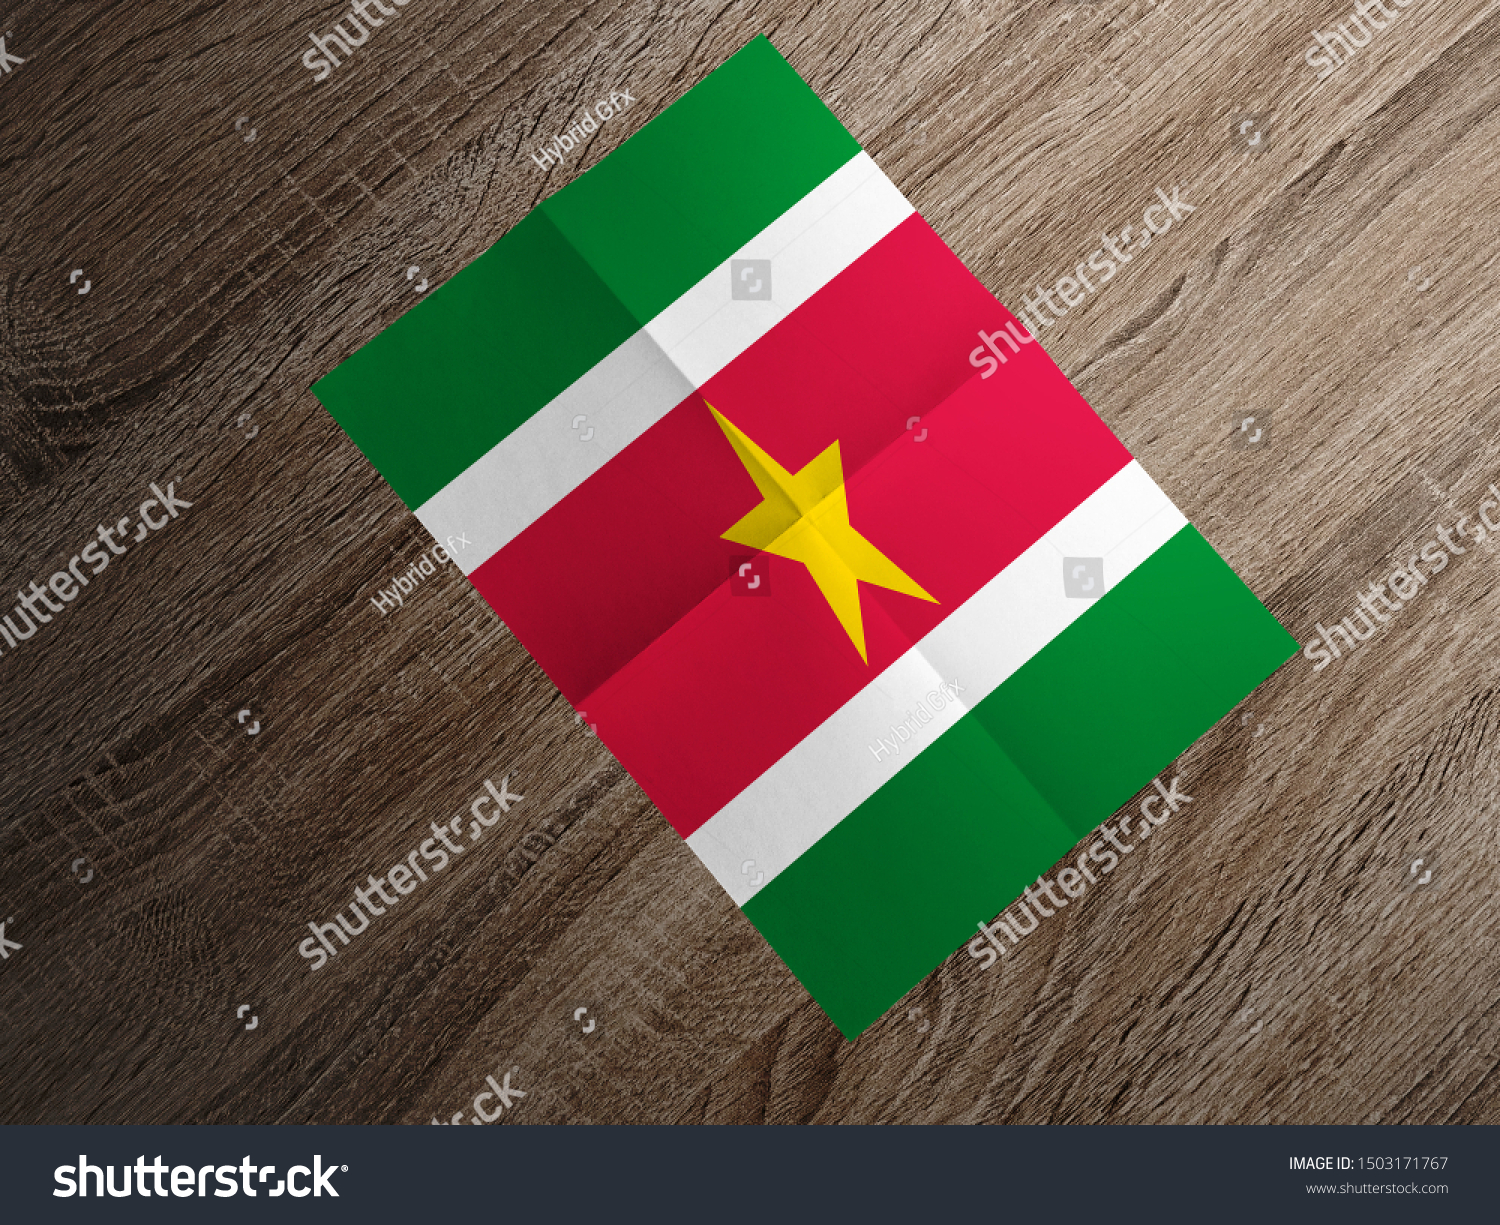 Flag of Suriname on paper. Suriname Flag on wooden table. #1503171767